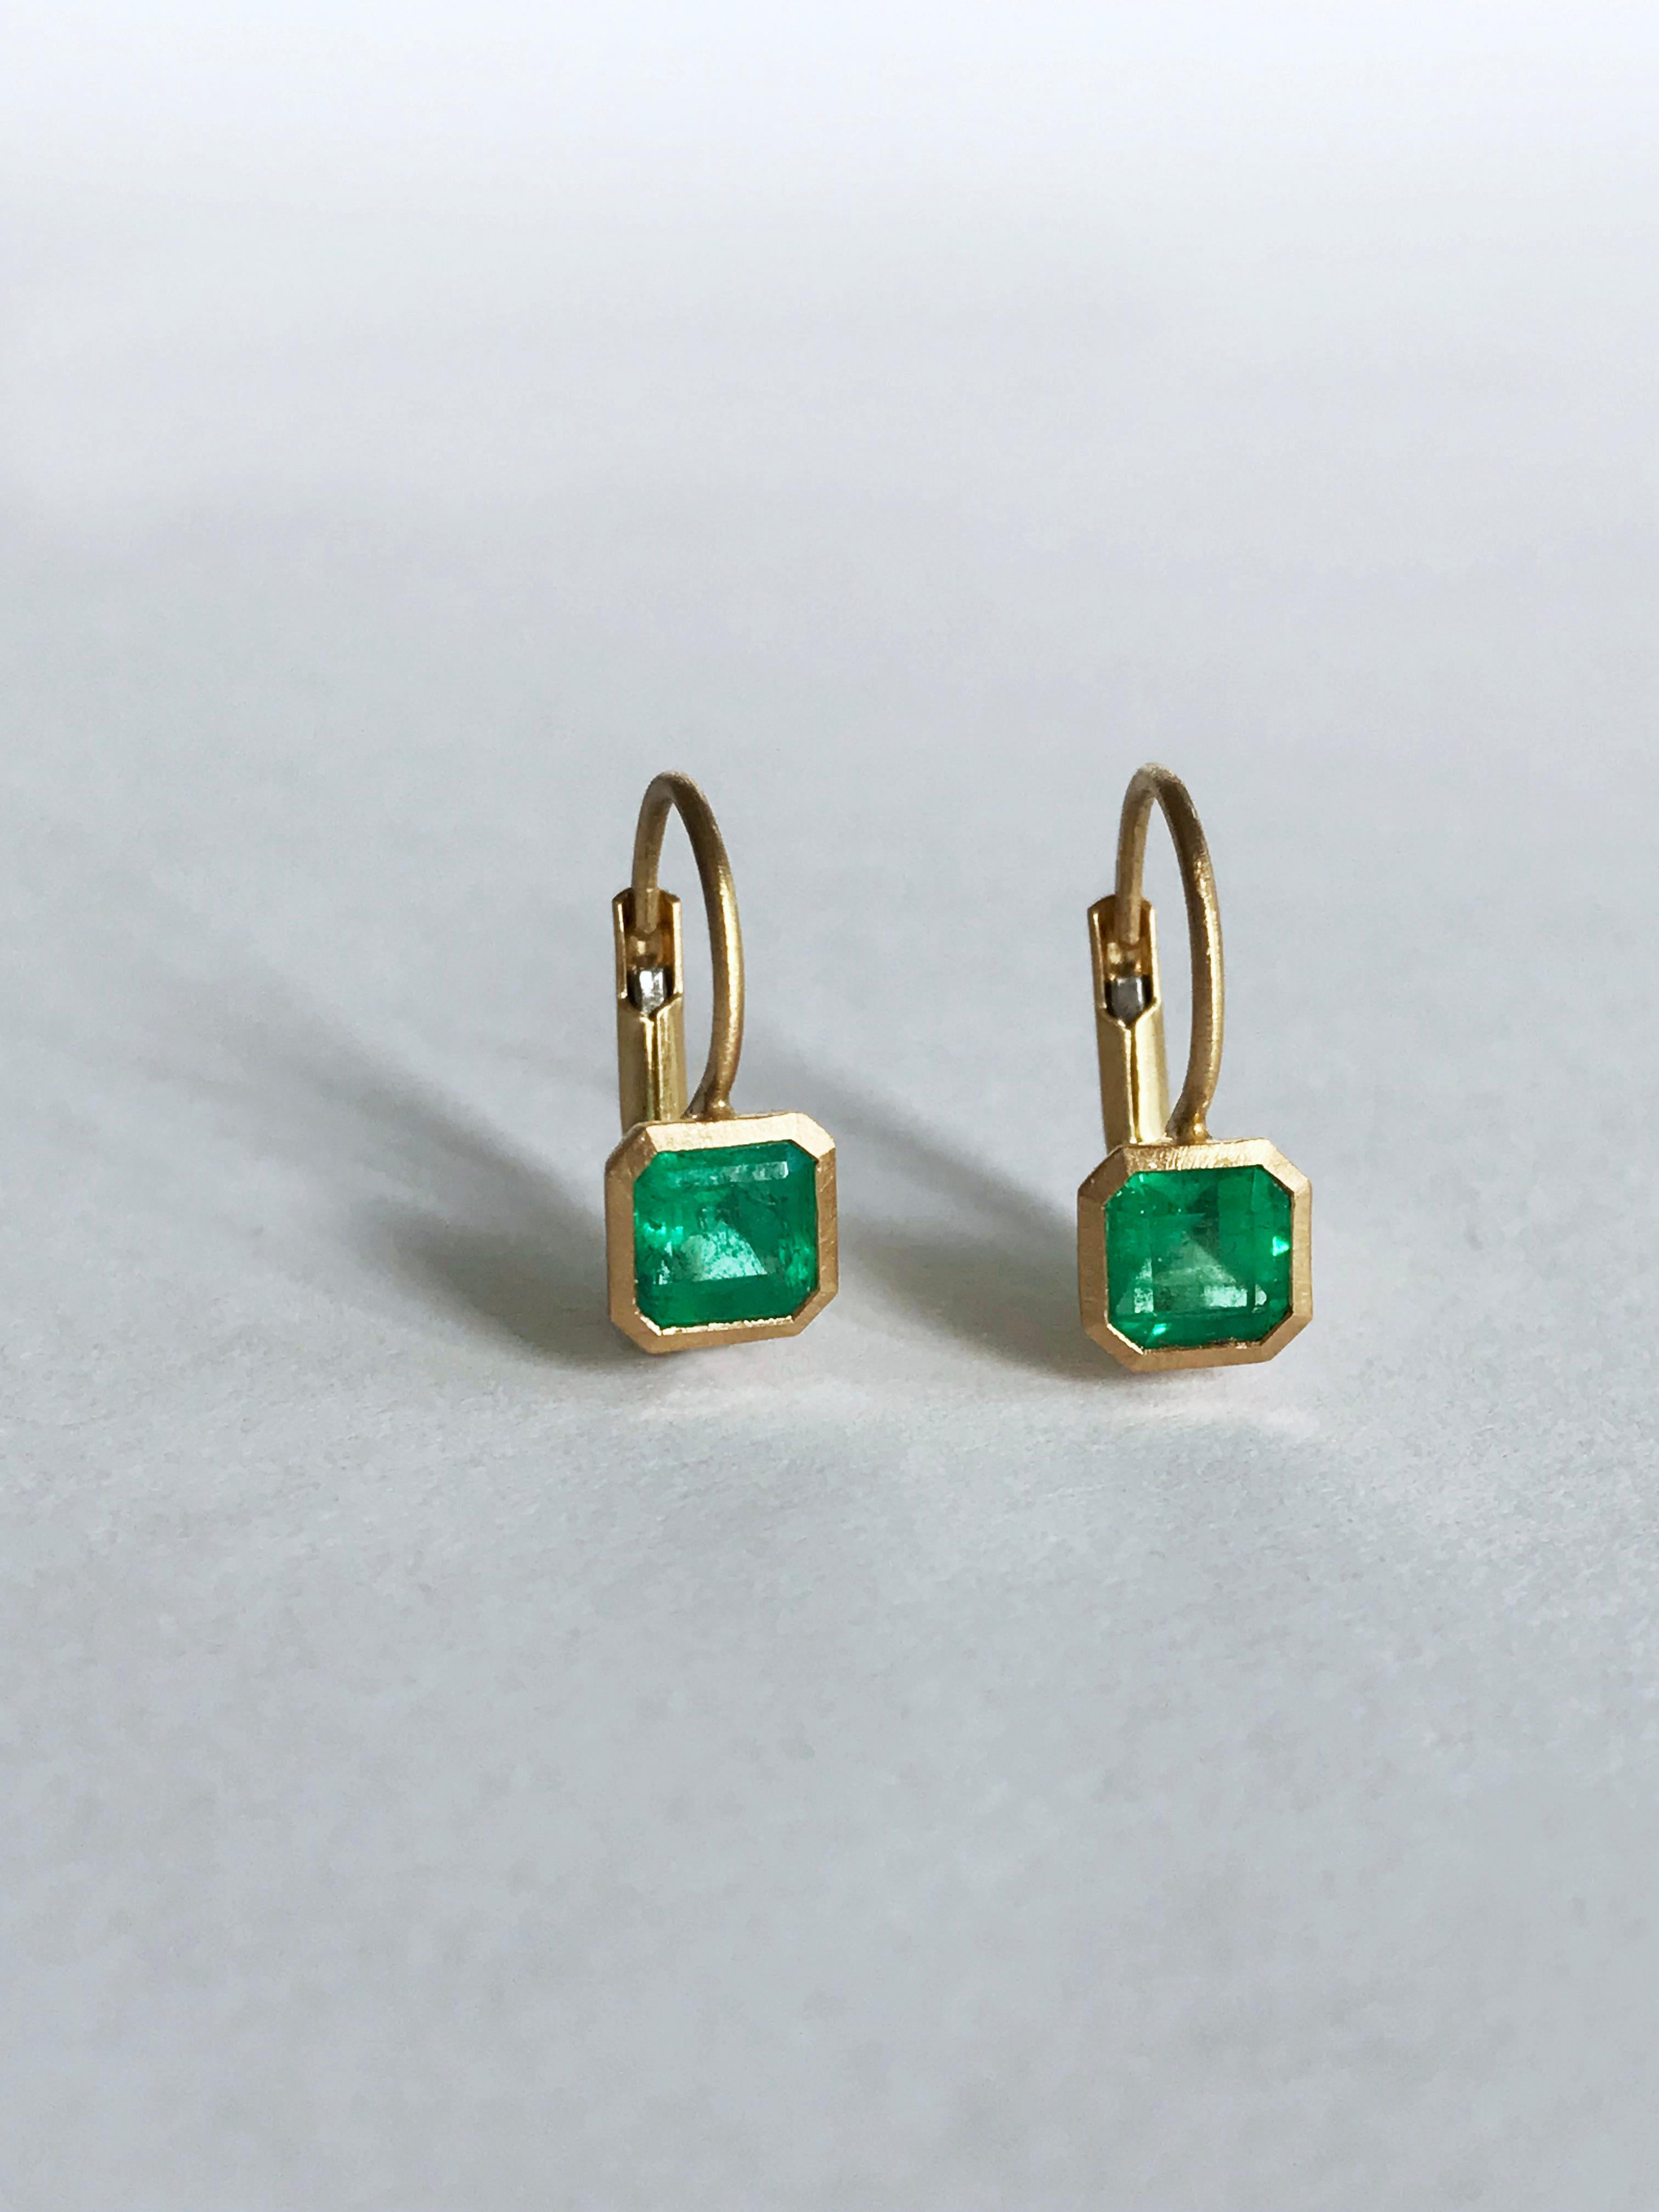 Dalben 0.91 Carat Colombian Emerald Yellow Gold Tiny Earrings For Sale 2